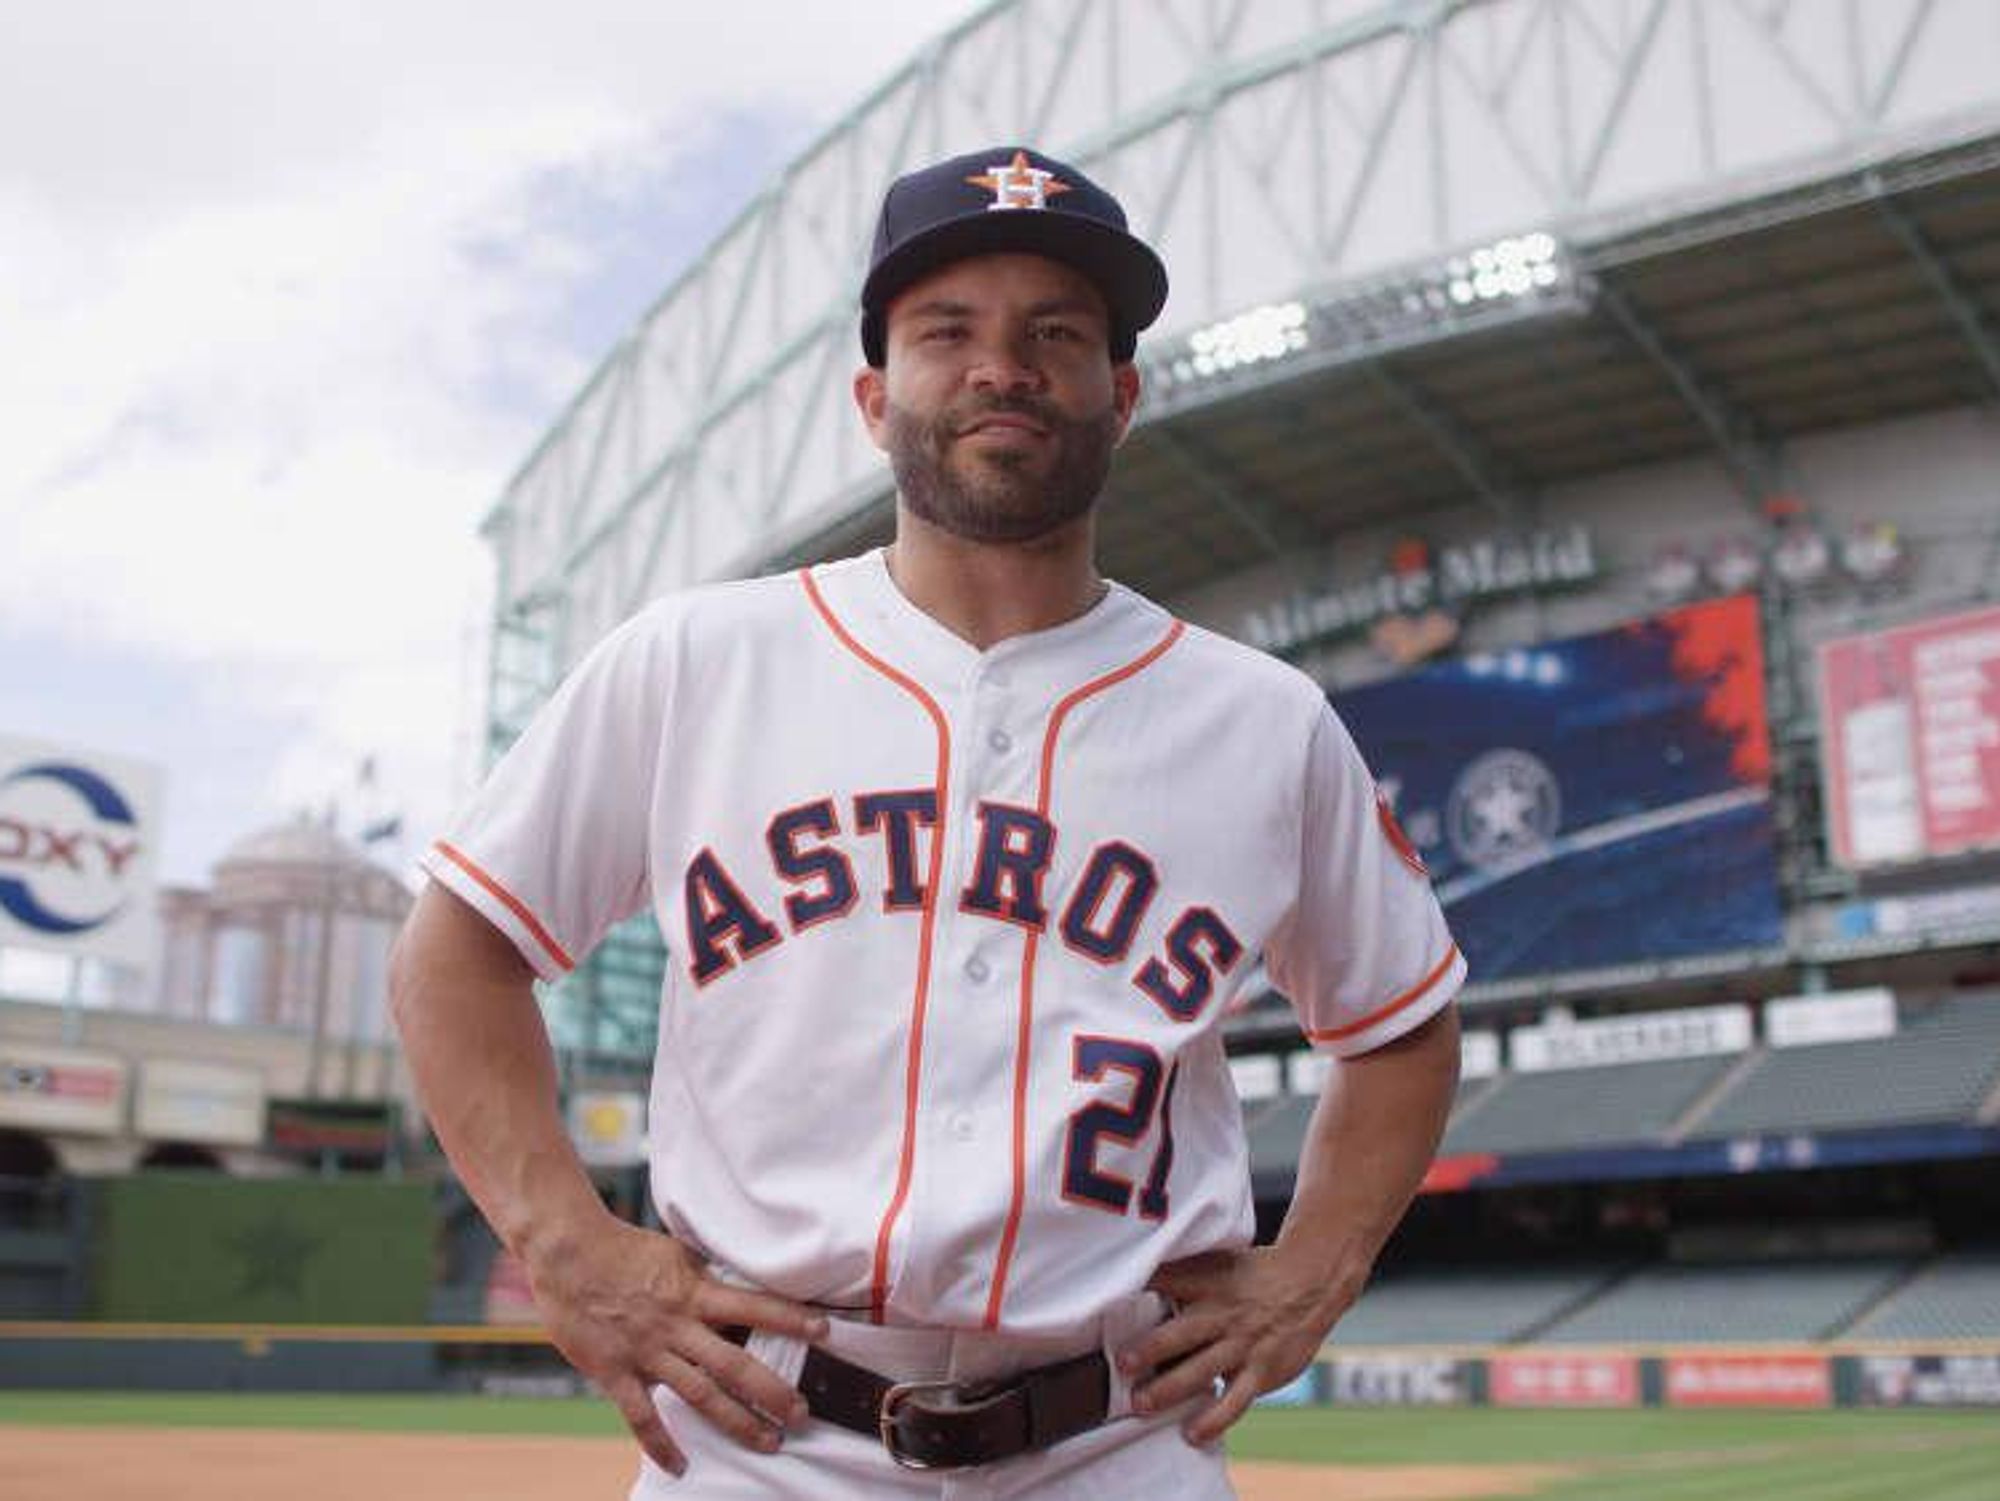 How tall is the Houston Astros Jose Altuve?